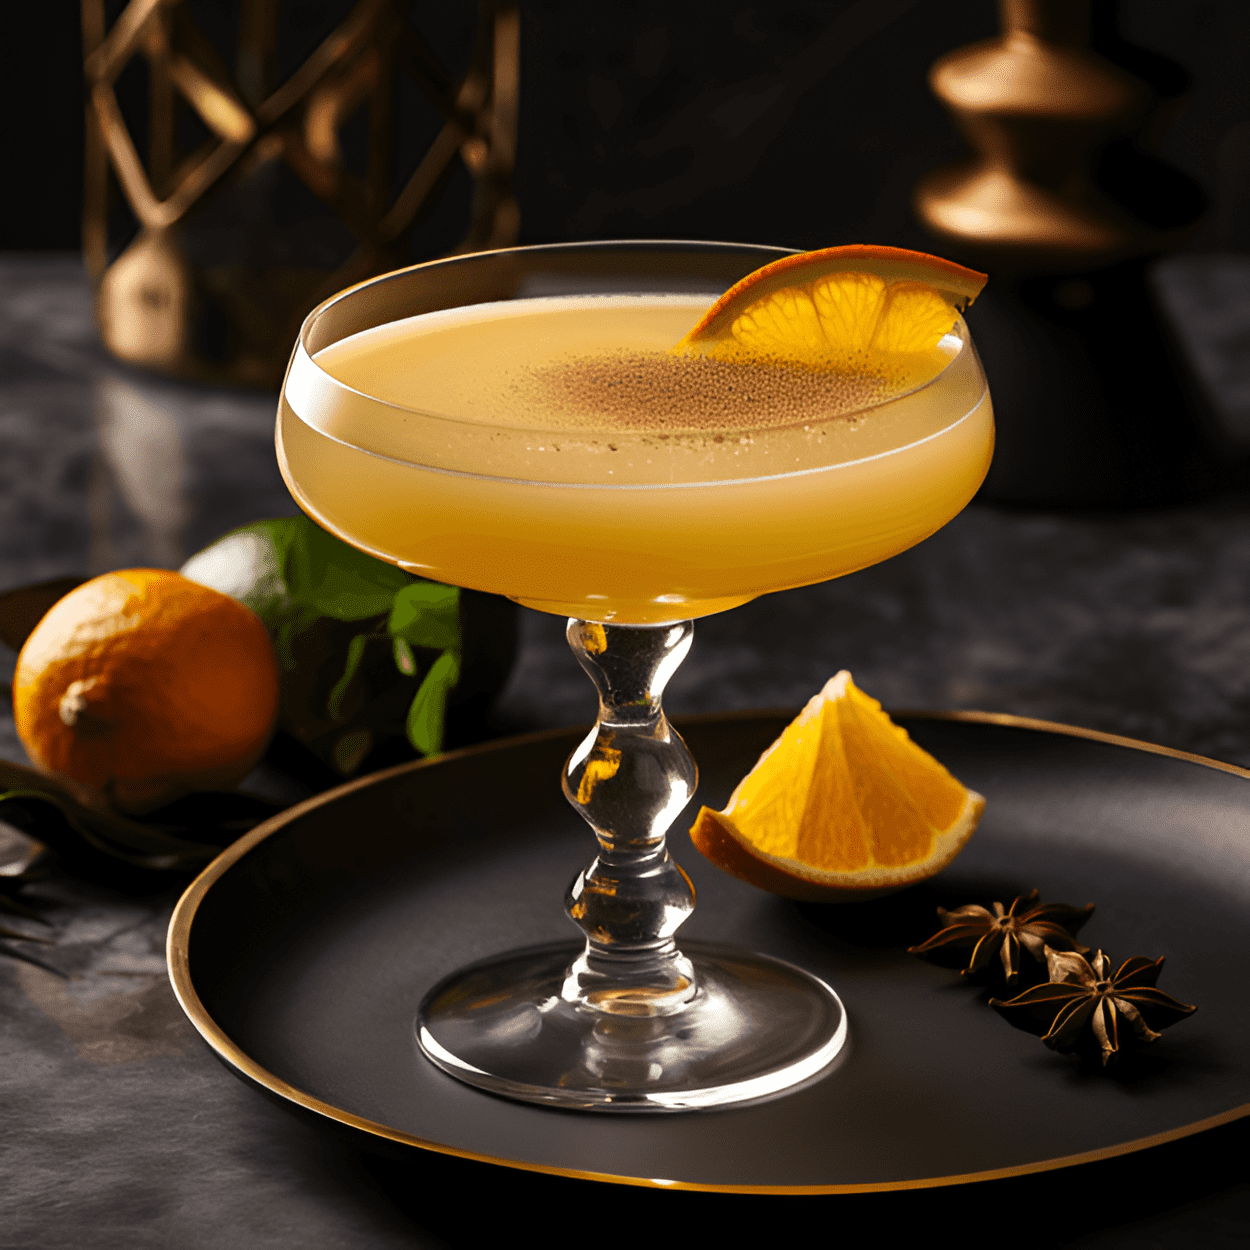 Reposado Cocktail Recipe - The Reposado cocktail has a well-balanced taste, with a combination of sweet, sour, and slightly bitter flavors. The aged tequila provides a smooth and slightly oaky base, while the citrus and sweeteners add a refreshing and zesty kick.